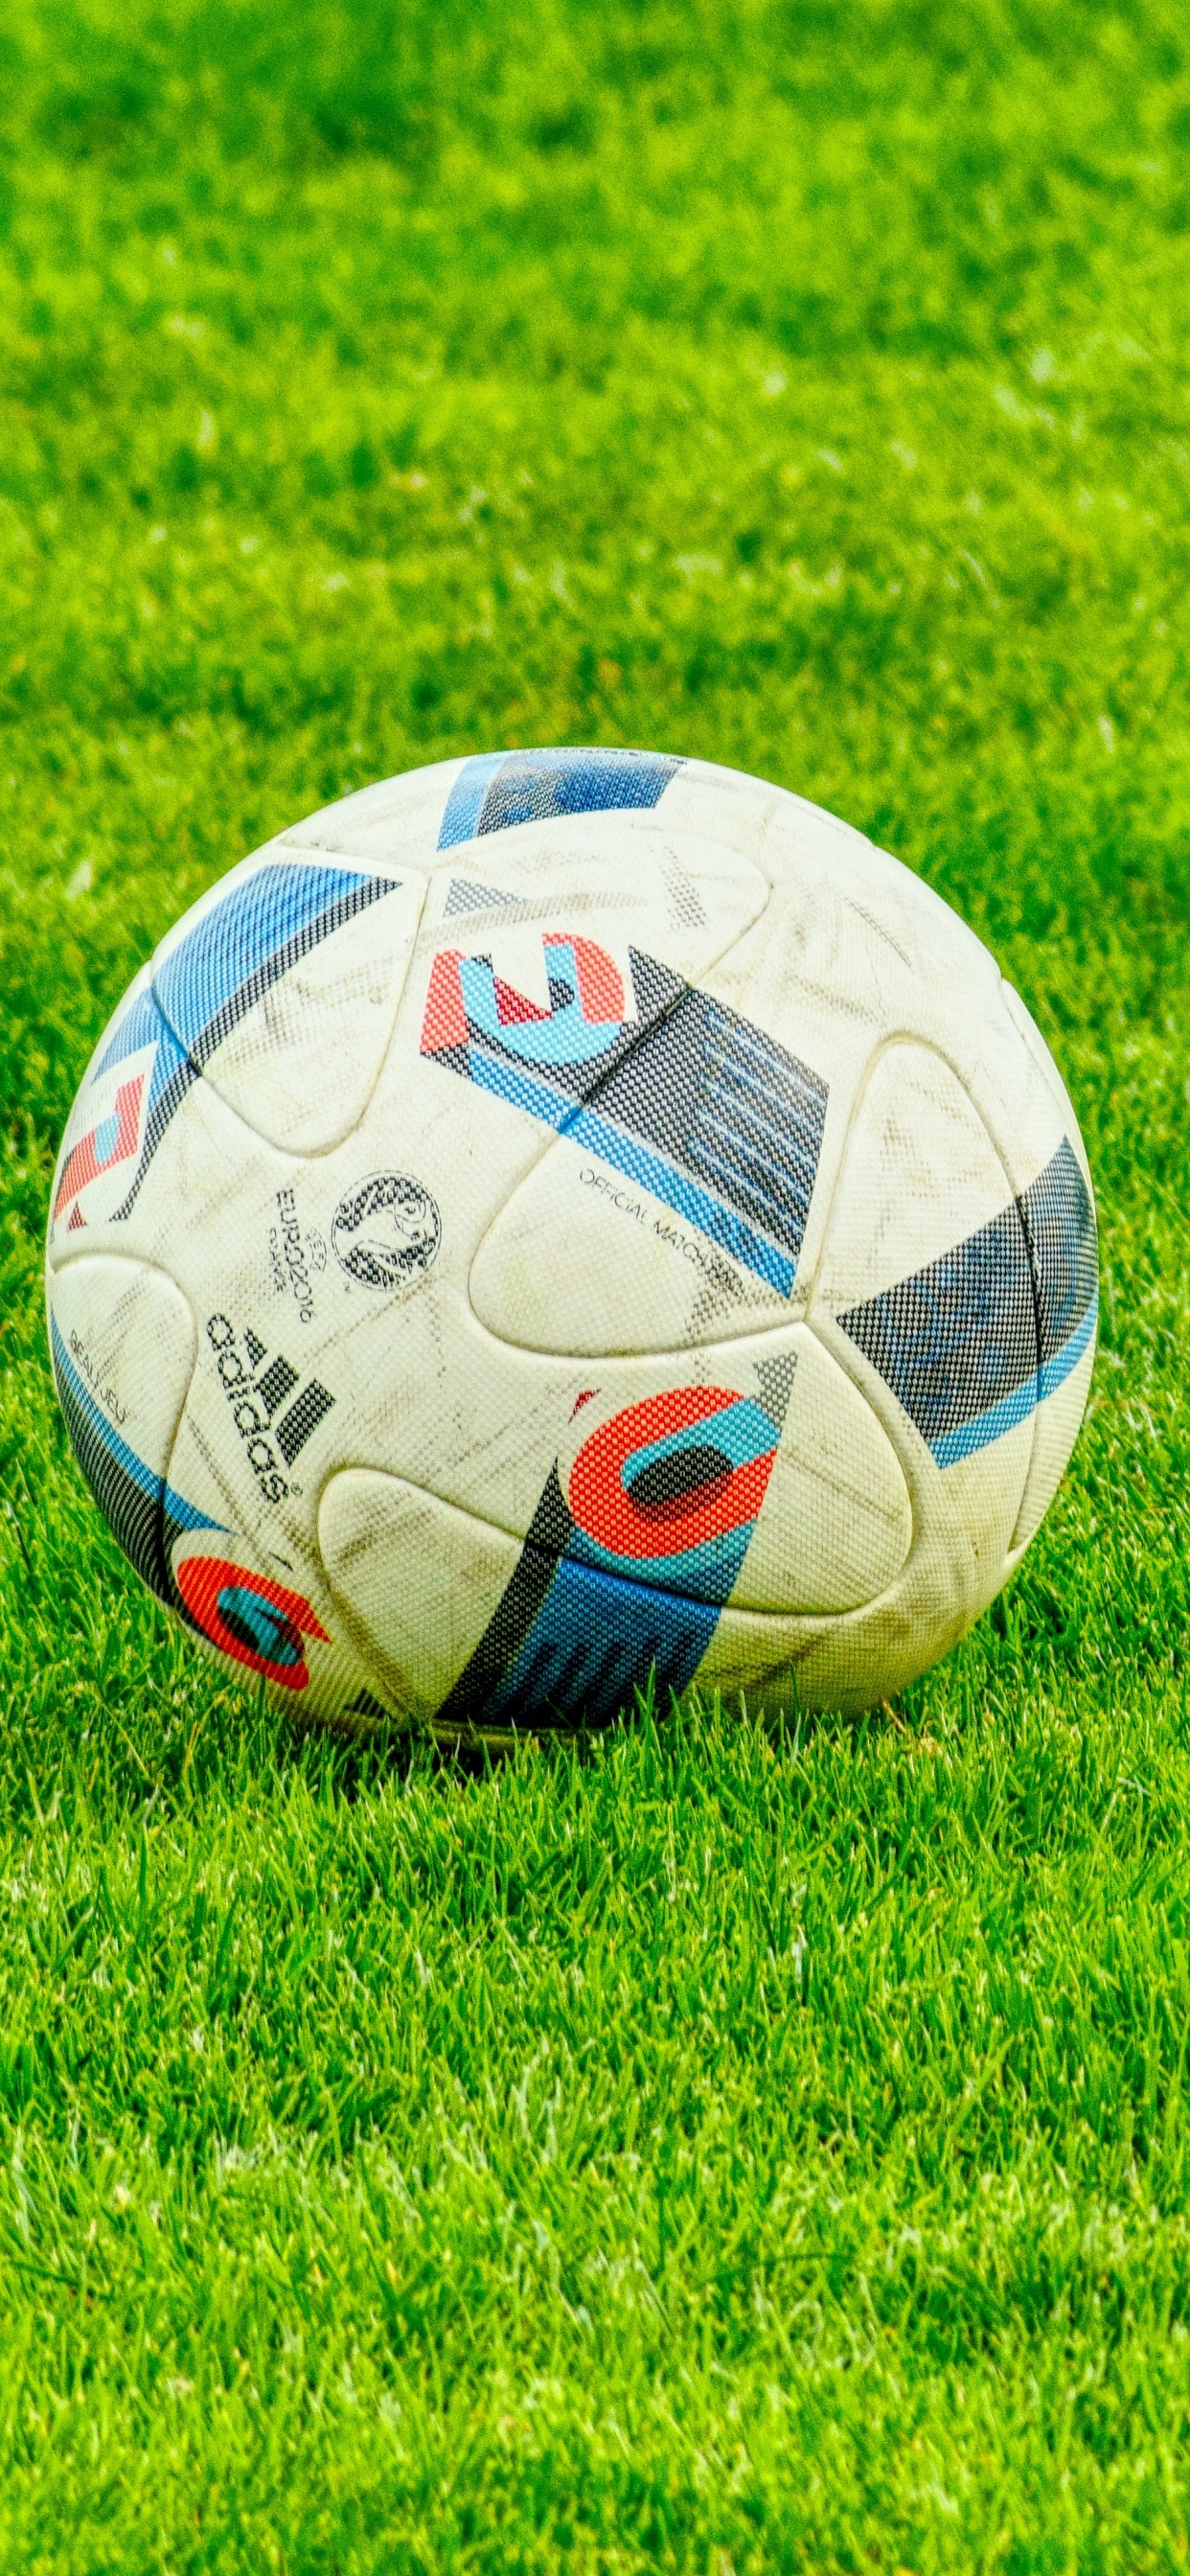 White Soccer Ball on Green Grass Field During Daytime. Wallpaper in 1242x2688 Resolution